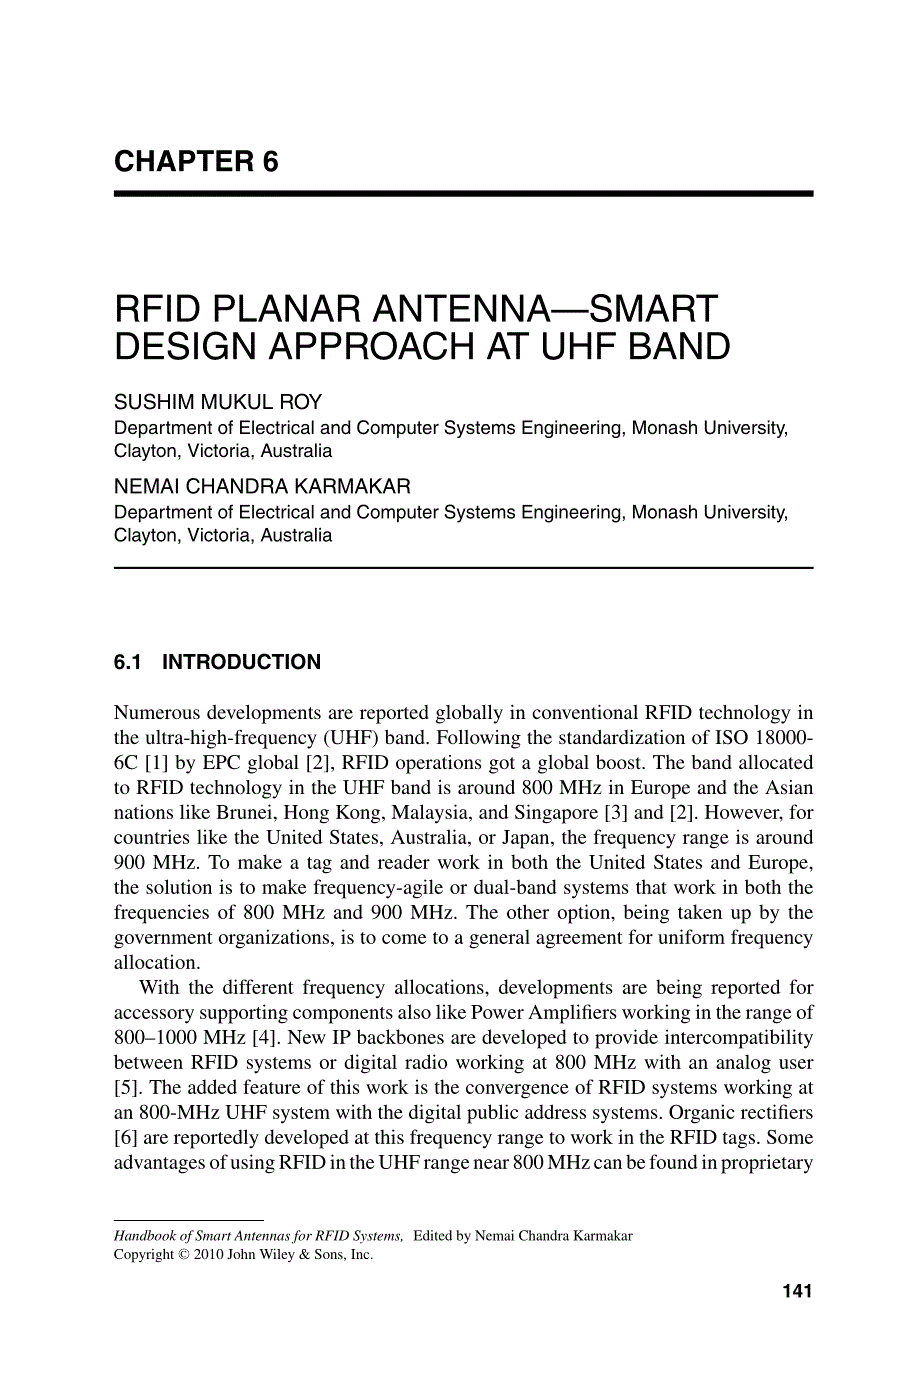 Chapter.6 RFID Planar Antenna-Smart Design Approach at UHF Band_第2页